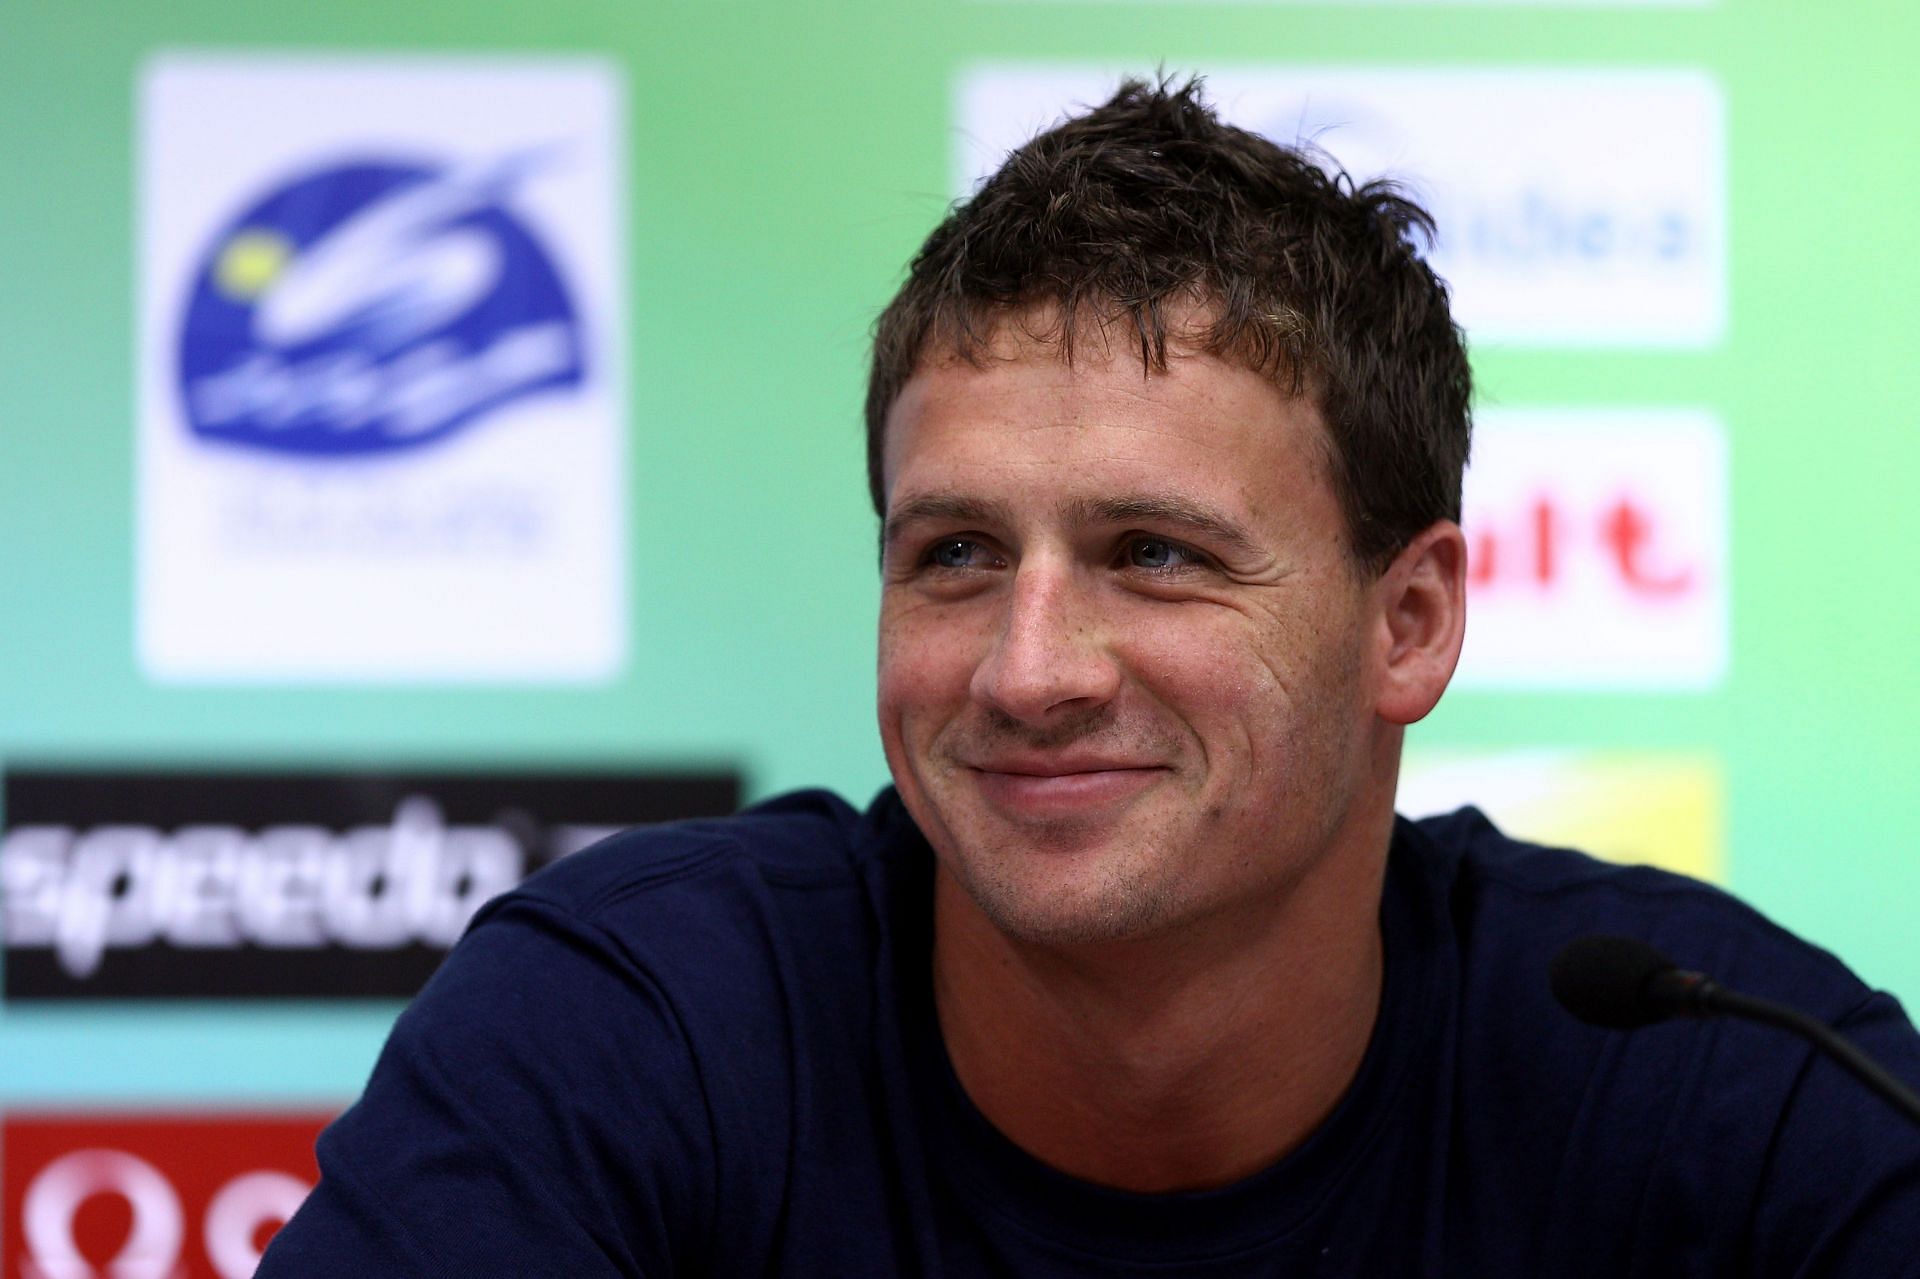 Ryan Lochte at the Team USA press conference in 2011